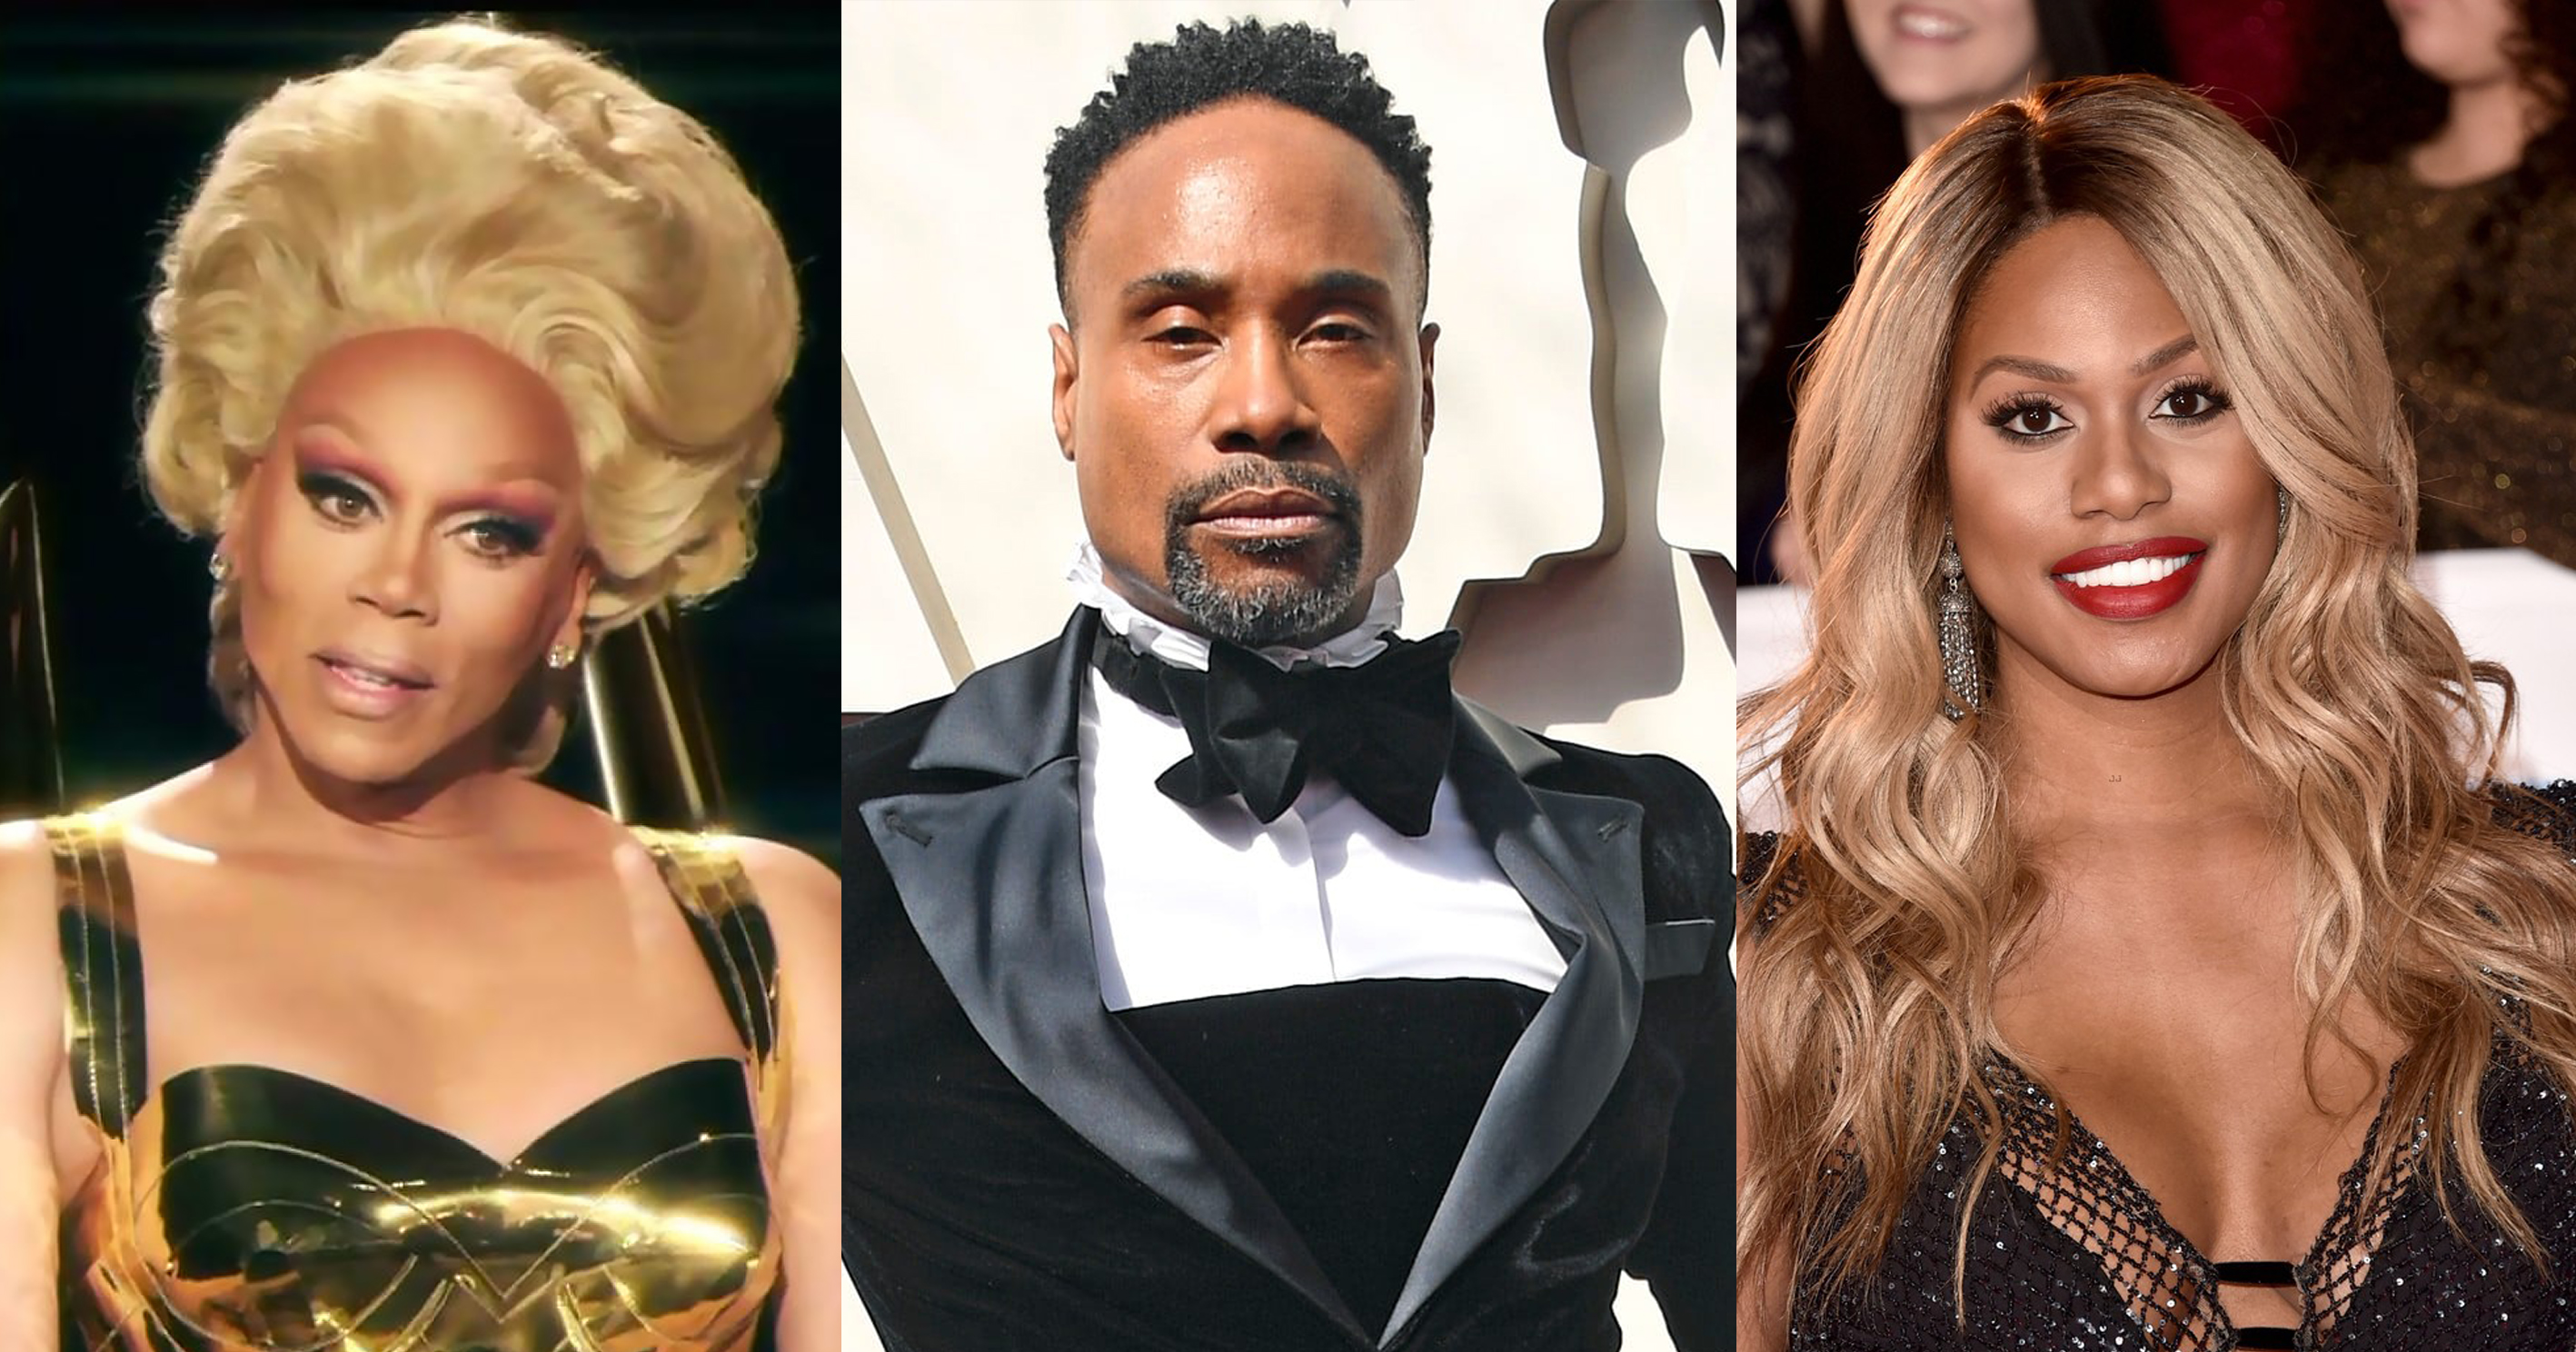 Split screen of RuPaul, Billy Porter and Laverne Cox three actors nominated for 2019 Emmy Awards.